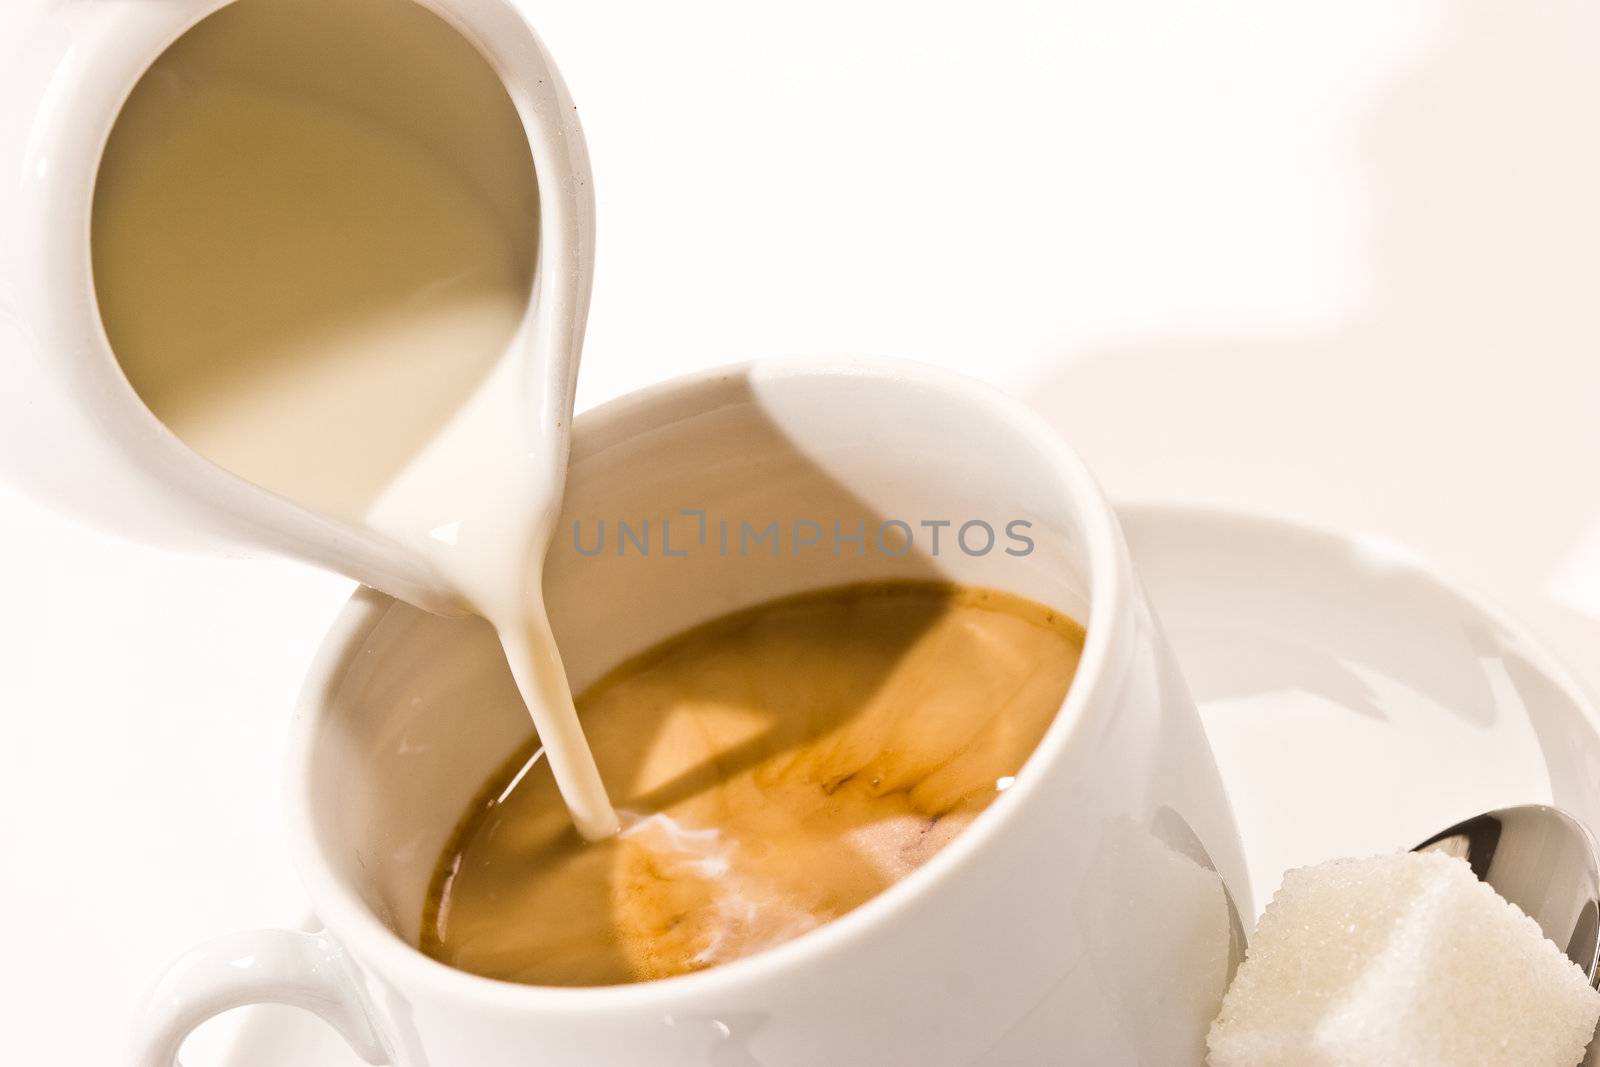 Puring milk in a cup of coffee